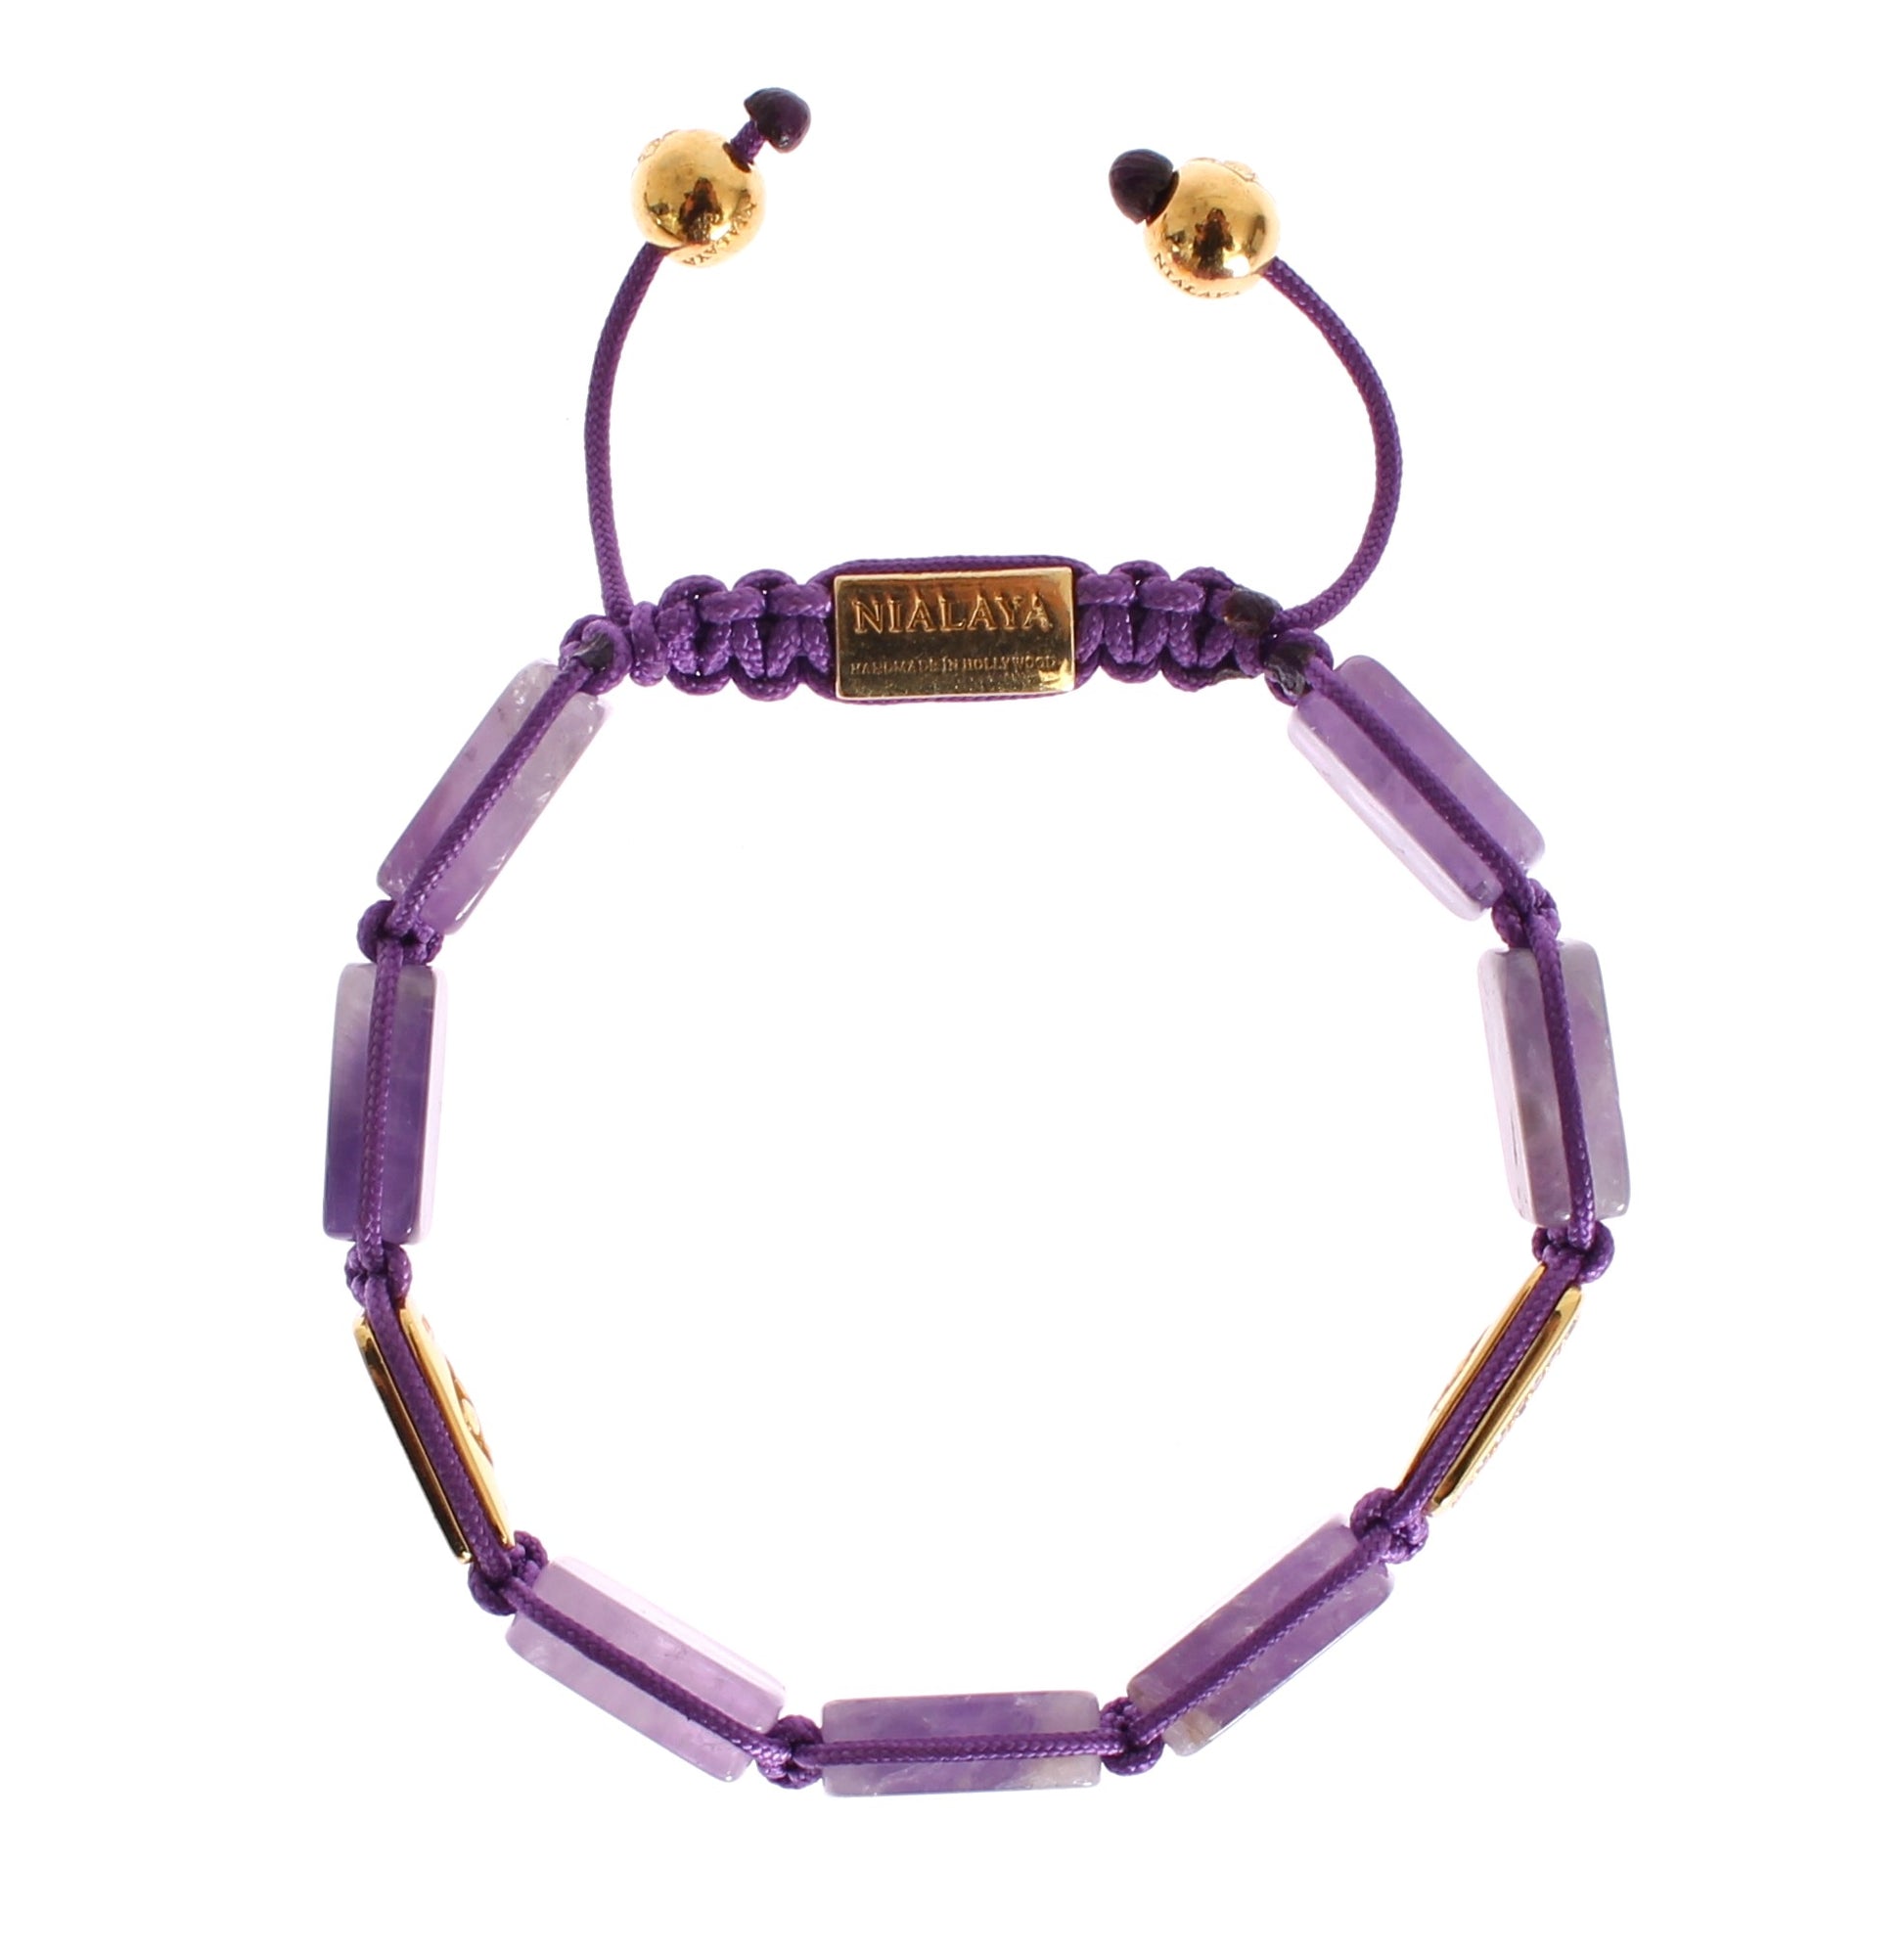 CZ Amethyst 18K Gold 925 Bracelet - Designed by Nialaya Available to Buy at a Discounted Price on Moon Behind The Hill Online Designer Discount Store